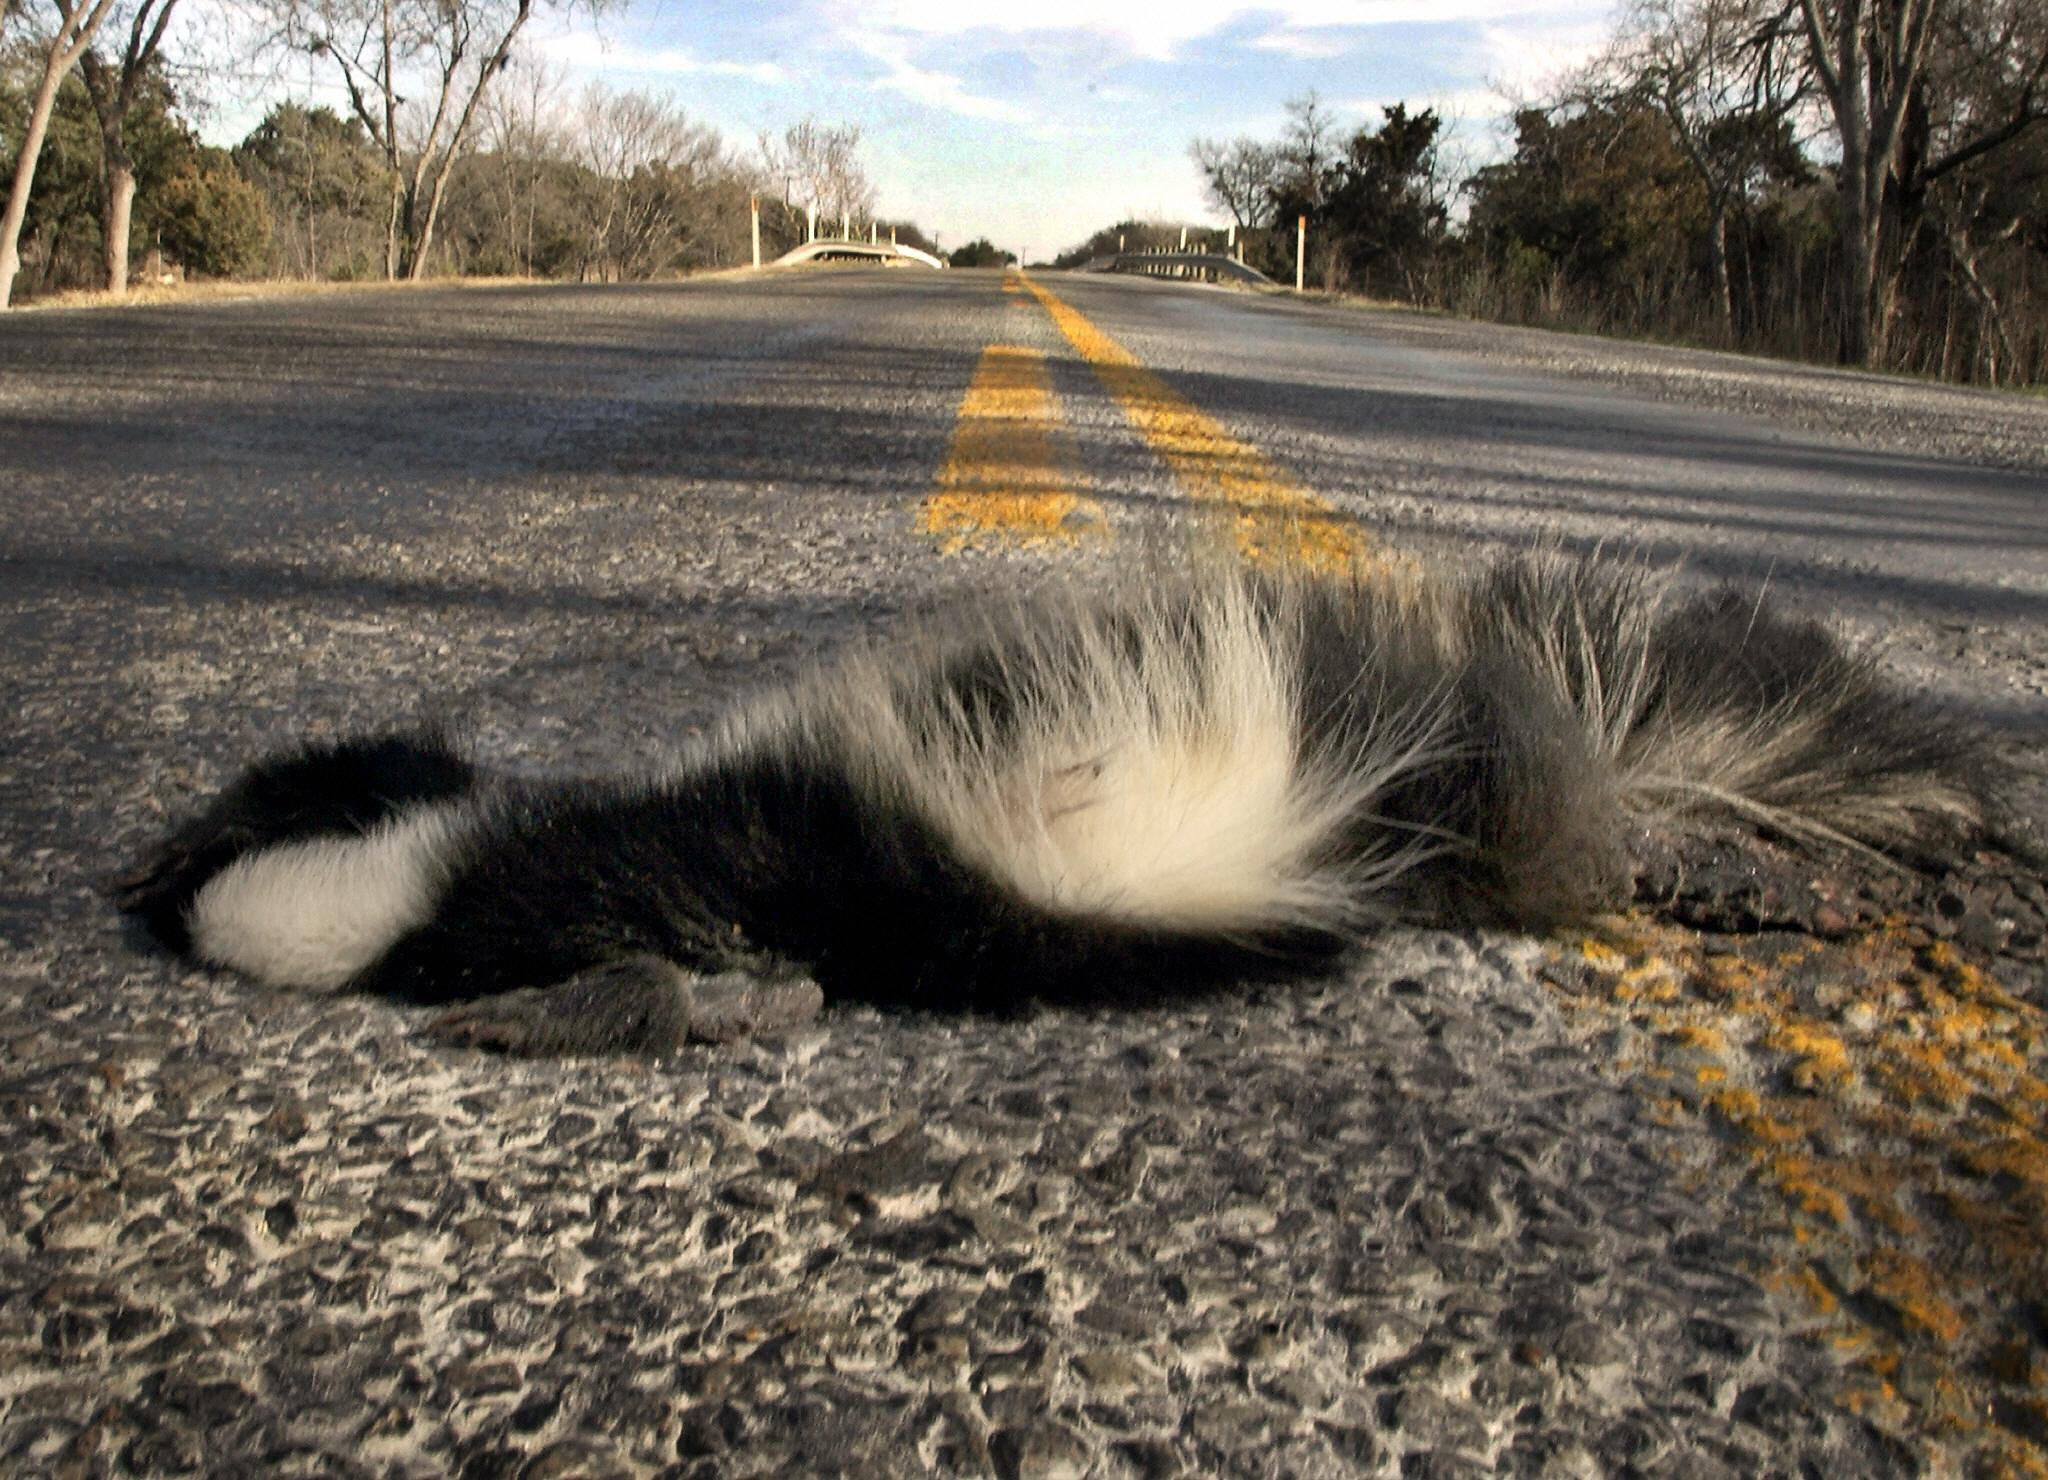 A dead skunk is flattened in the middle